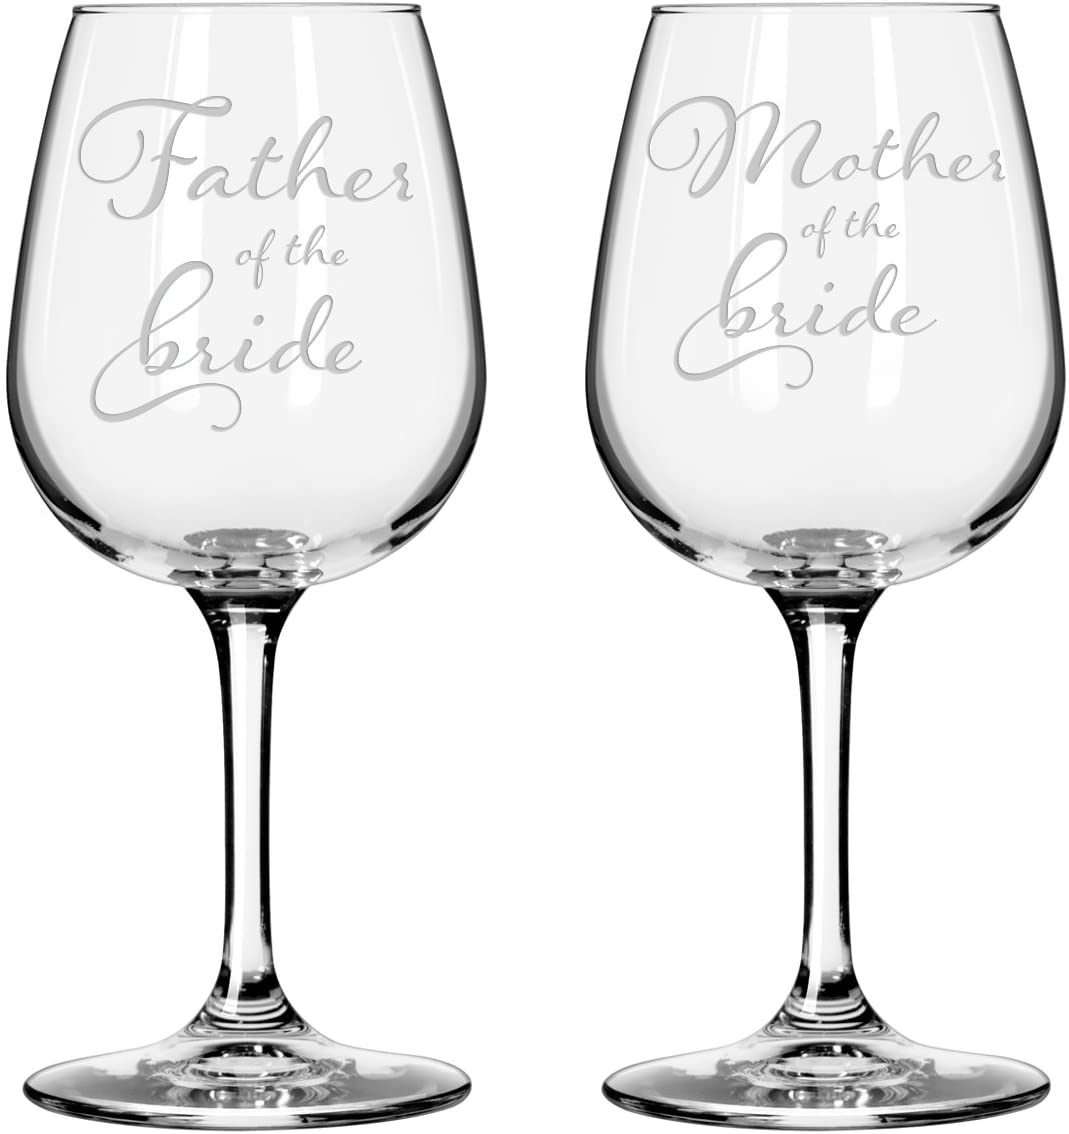 father-of-the-bride-wine-glass-set